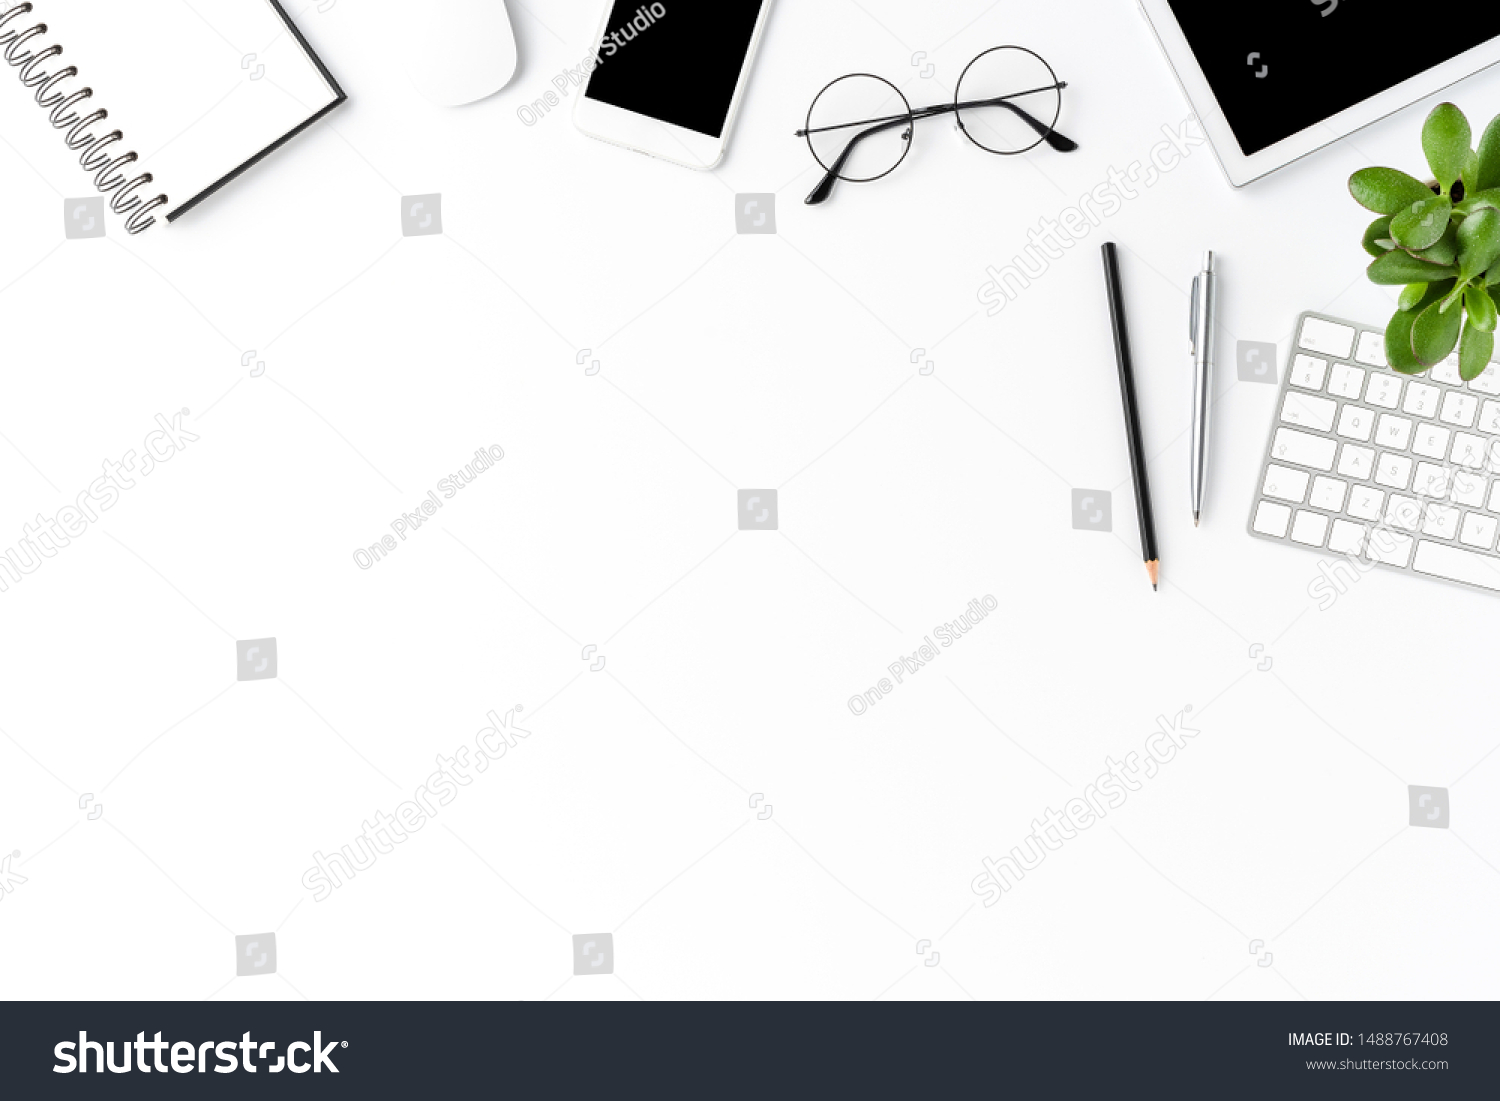 Concept of modern office desktop with accessories. Business background with copyspace #1488767408